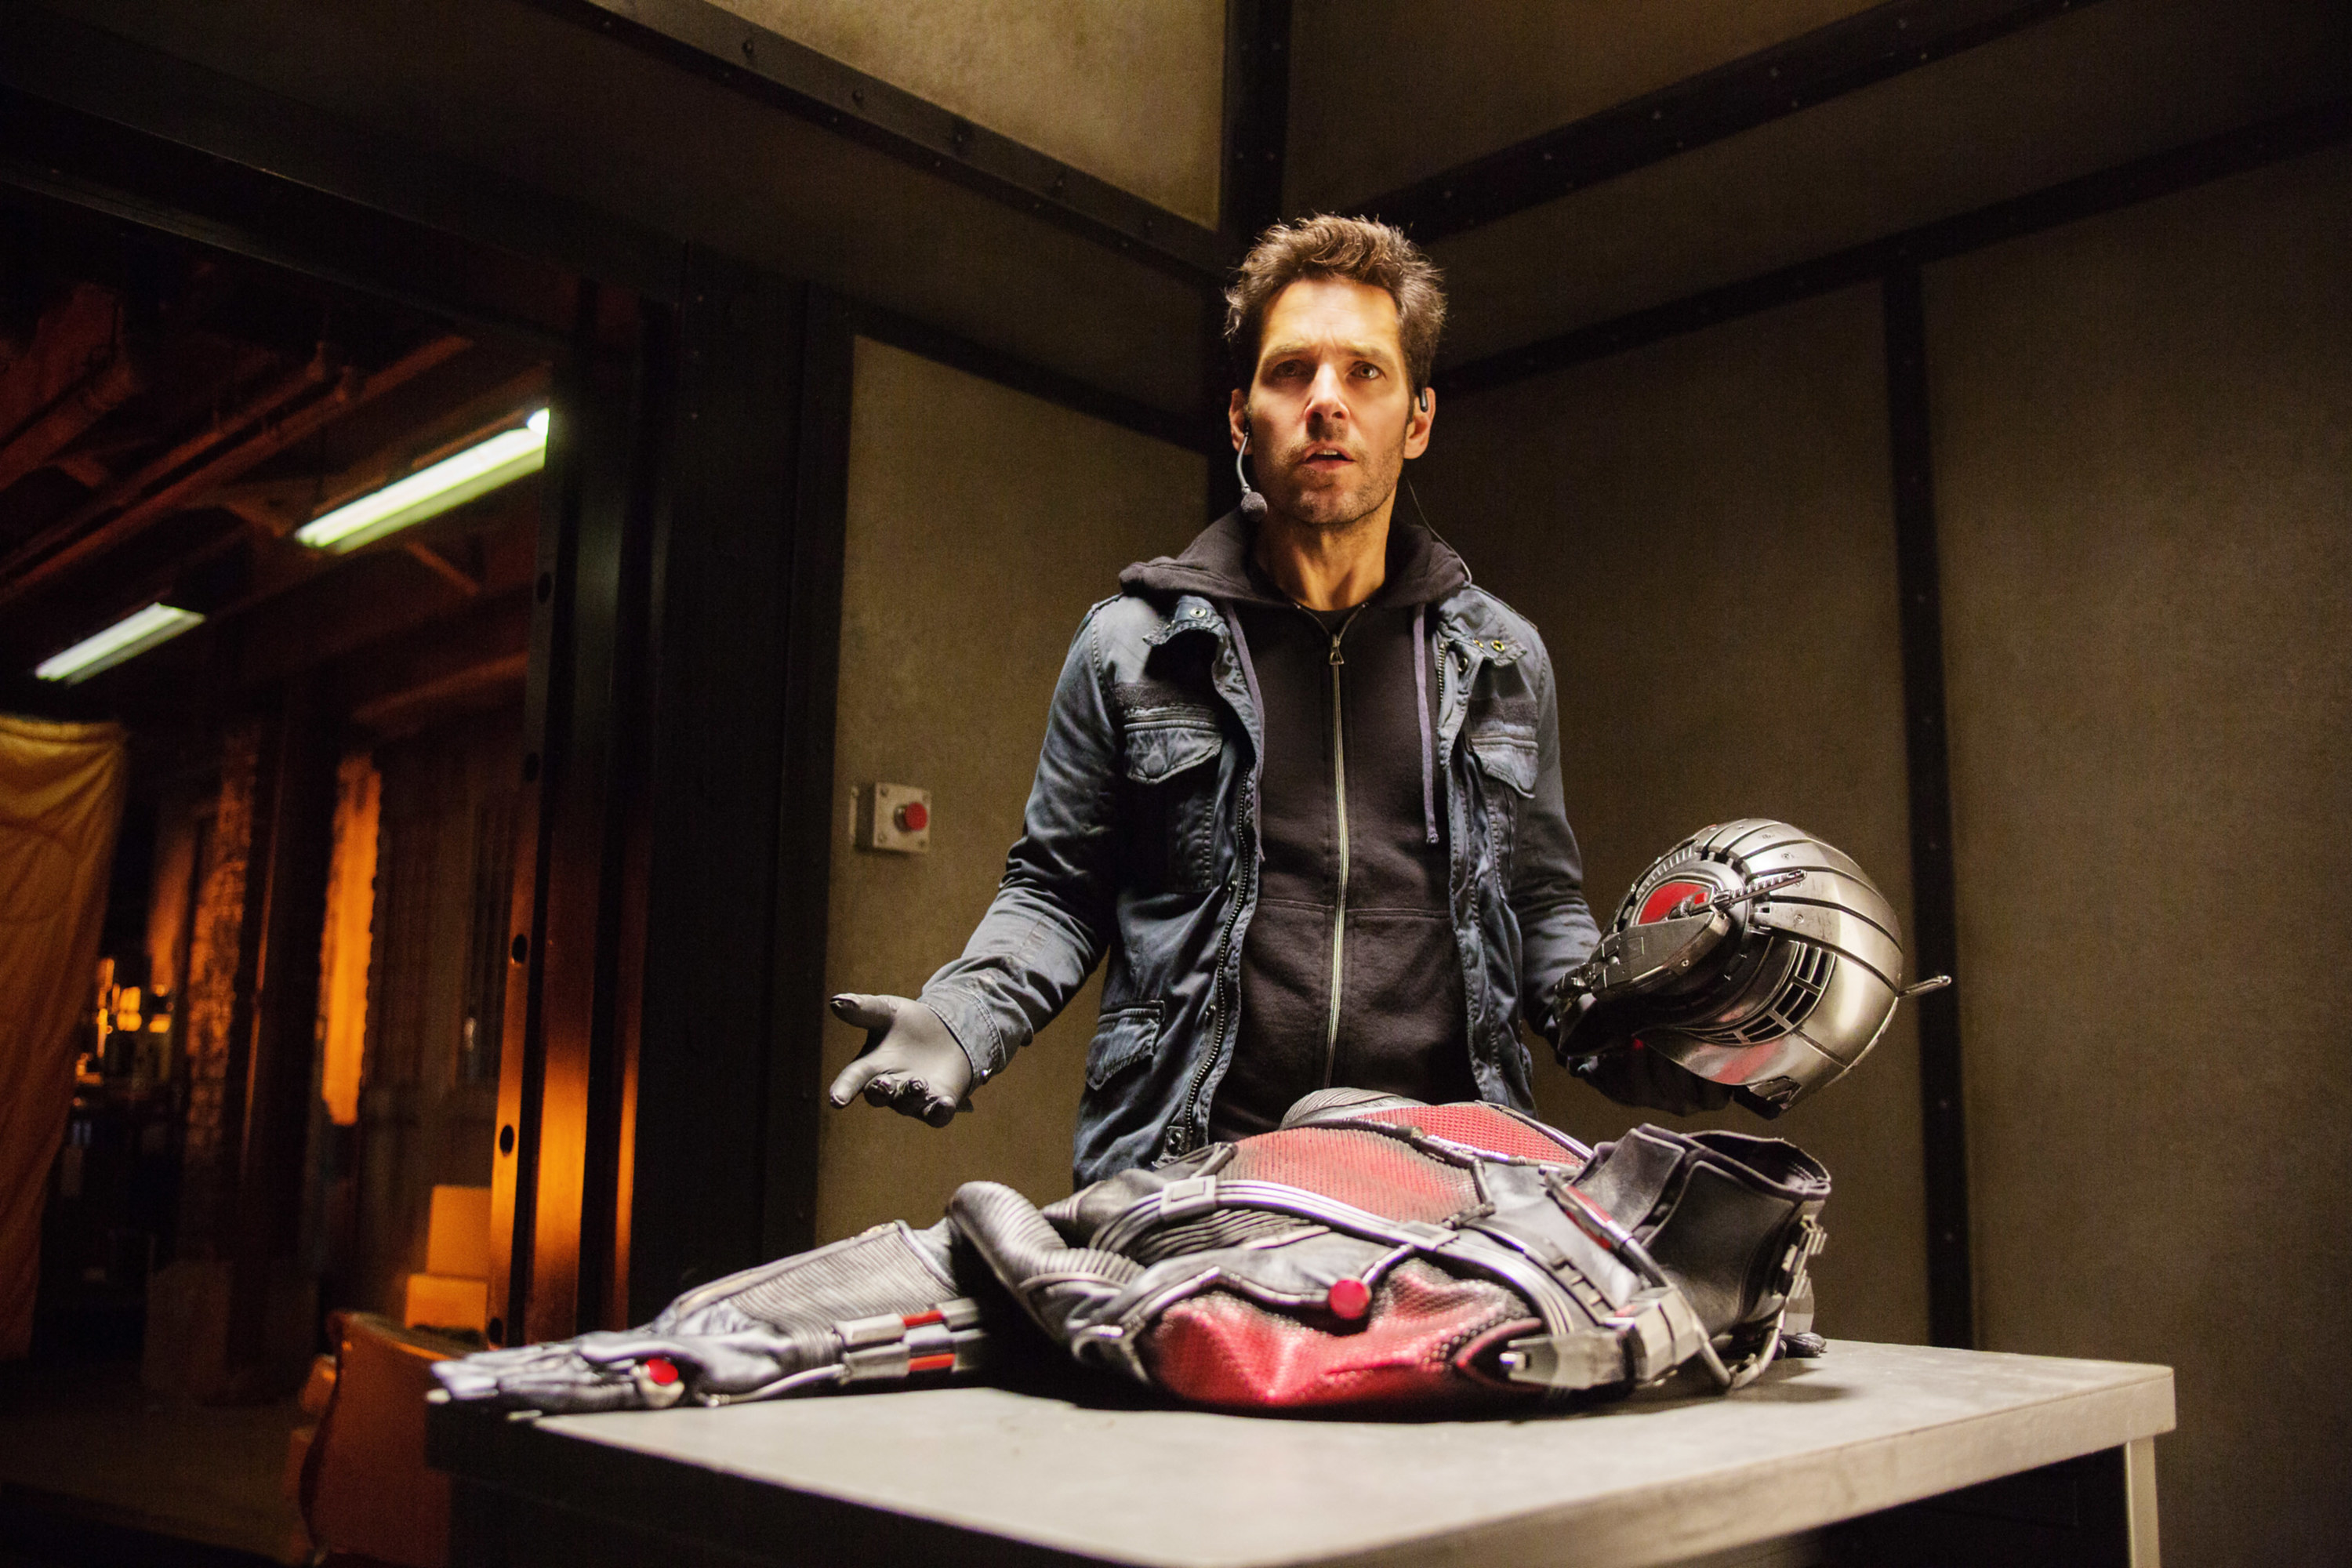 Ant-Man looks upset while holding his costume